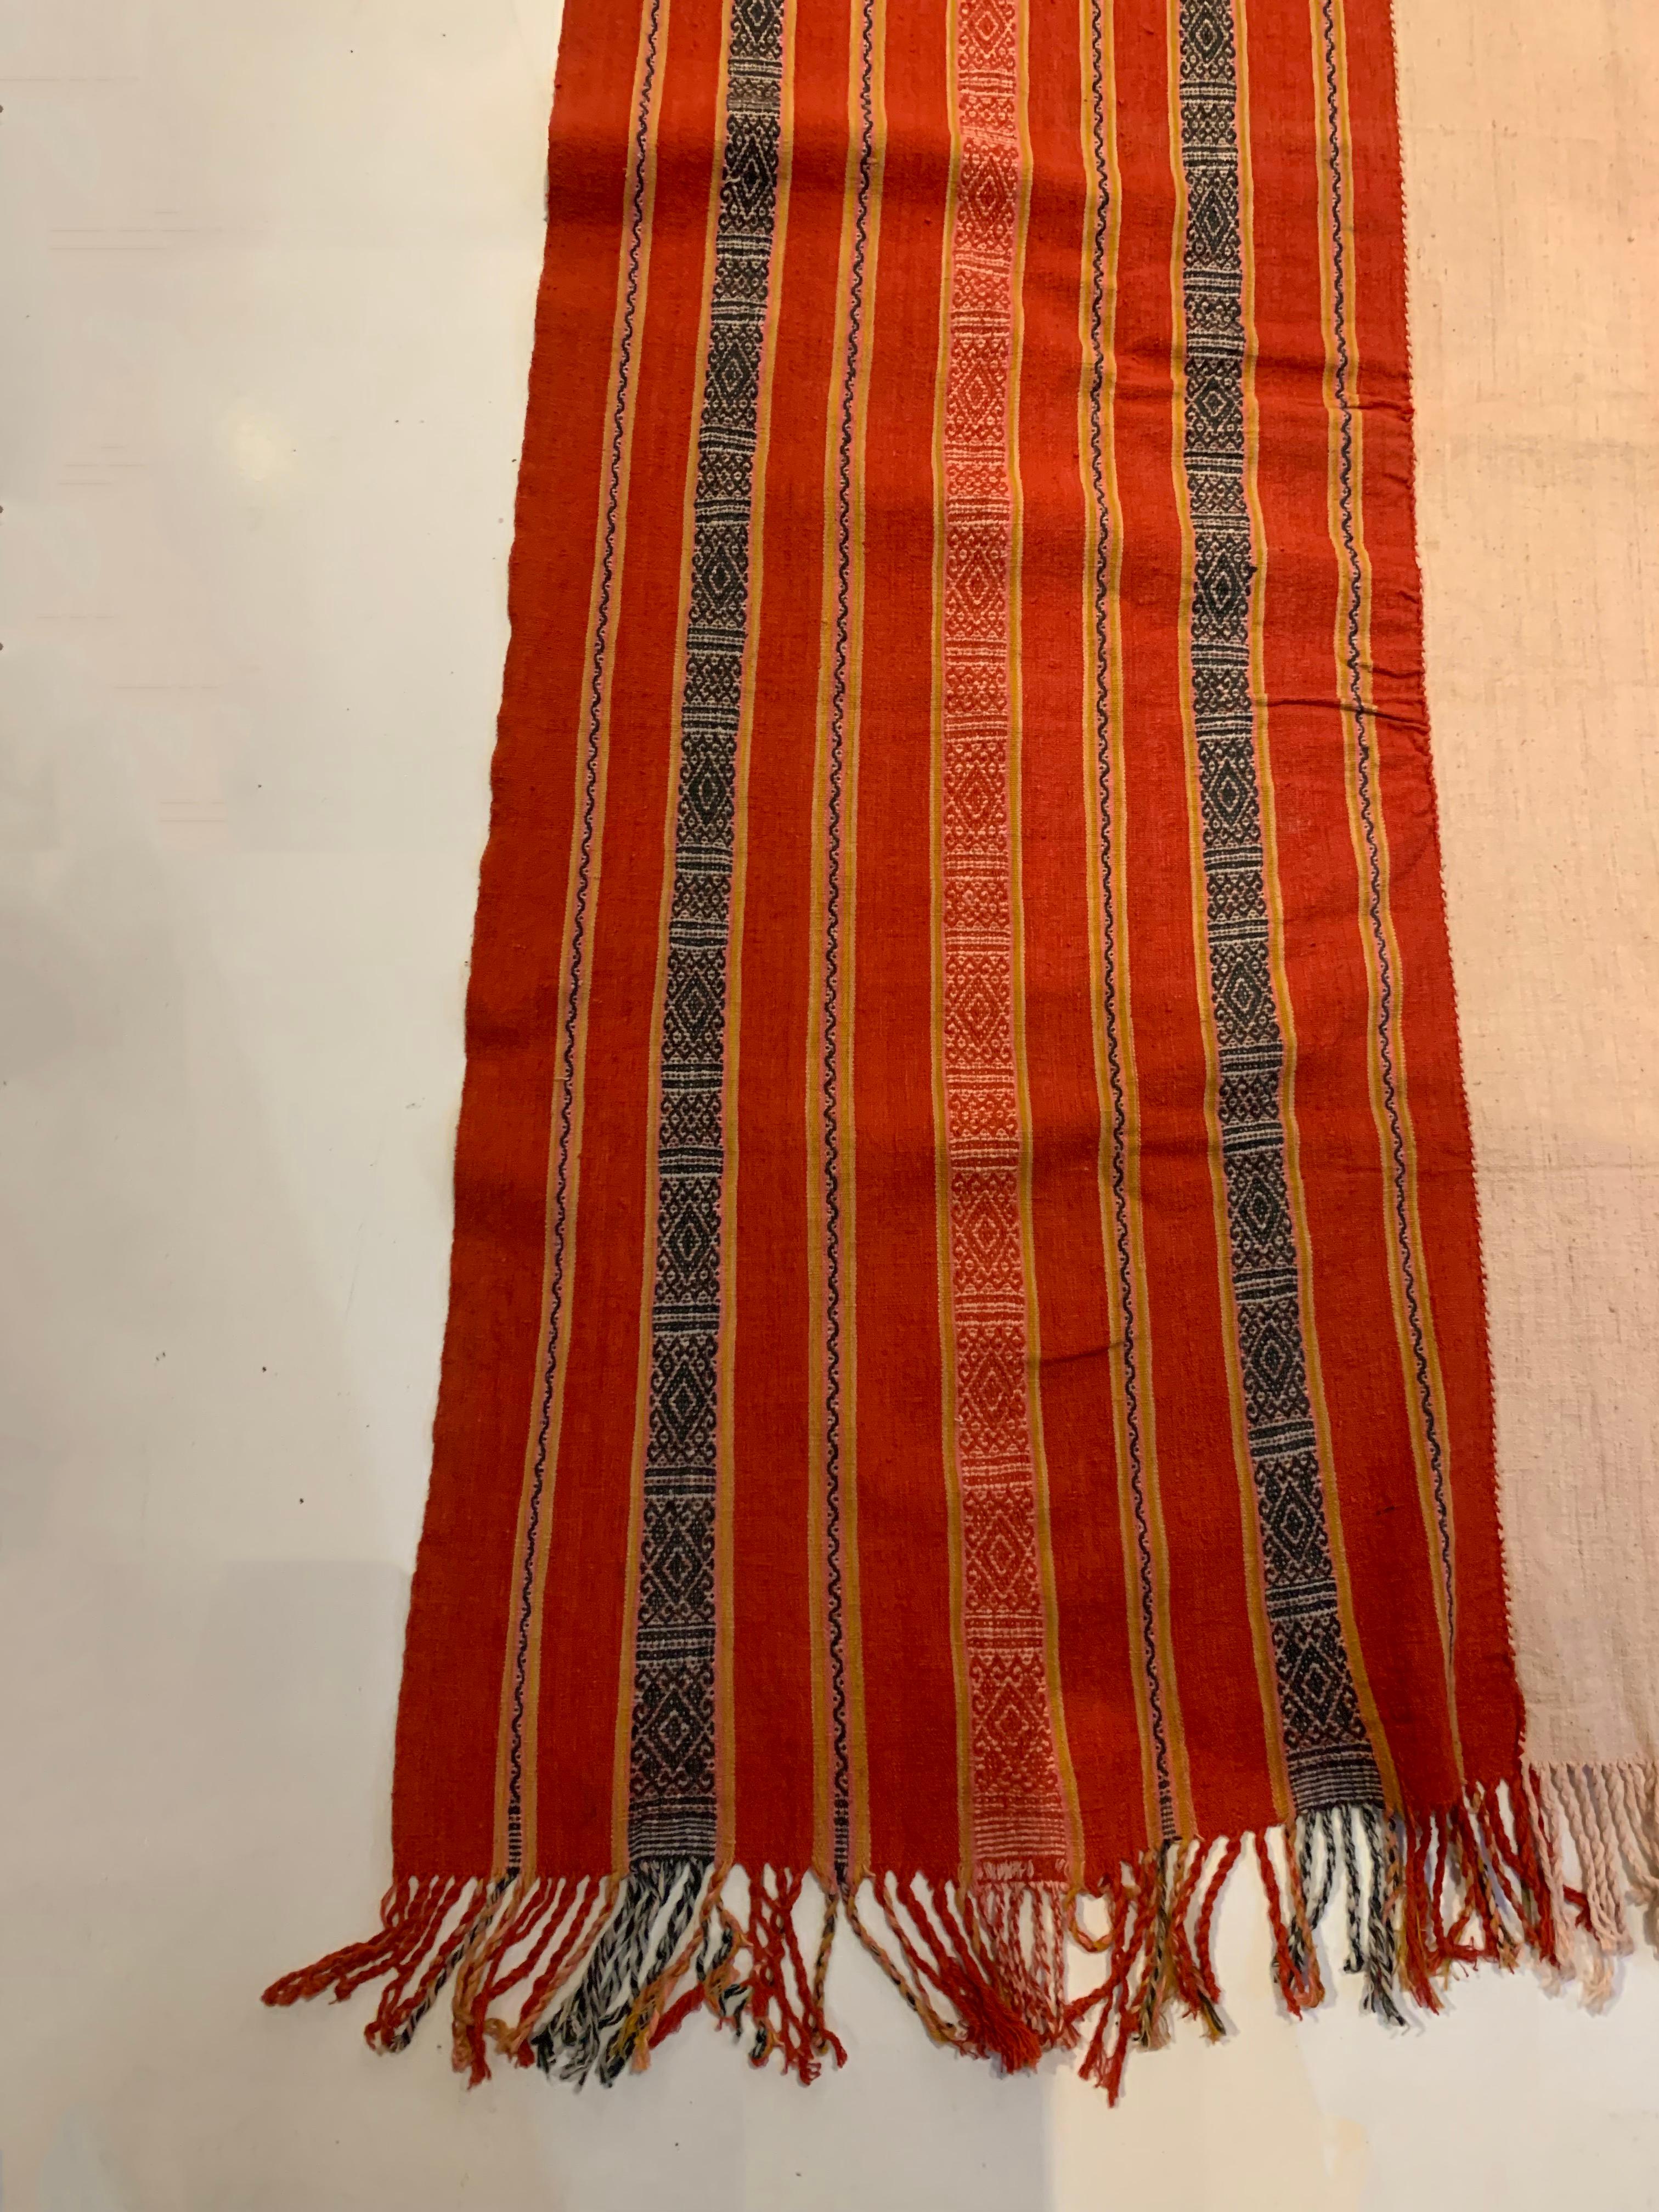 Hand-Woven Ikat Textile from Timor Stunning Tribal Motifs & Colors, Indonesia c. 1950 For Sale